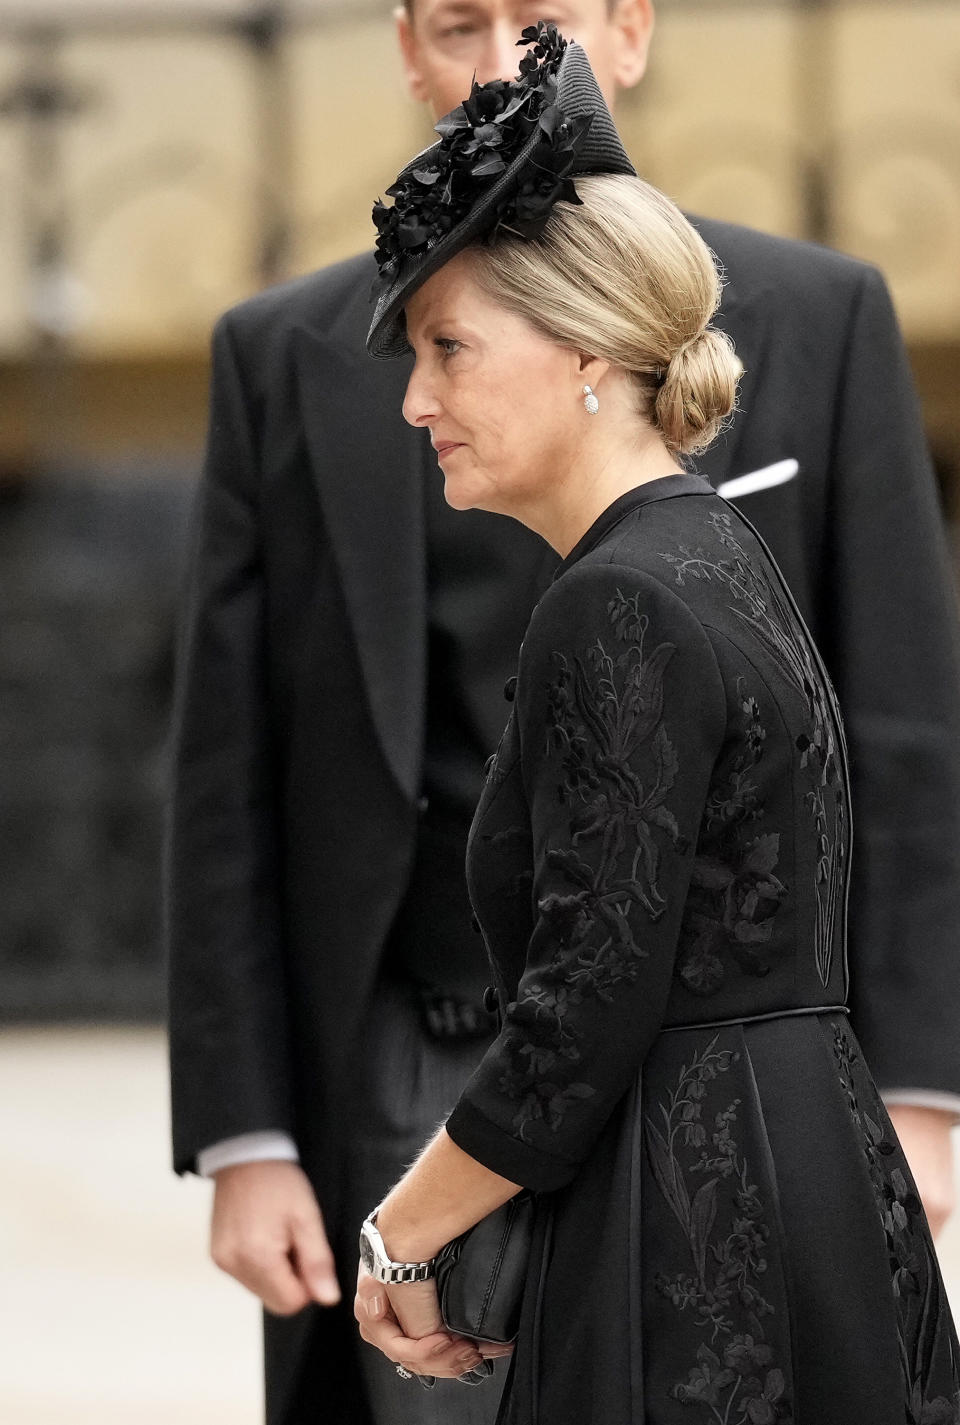 Sophie, Countess of Wessex arrives ahead of the State Funeral for Queen Elizabeth II 